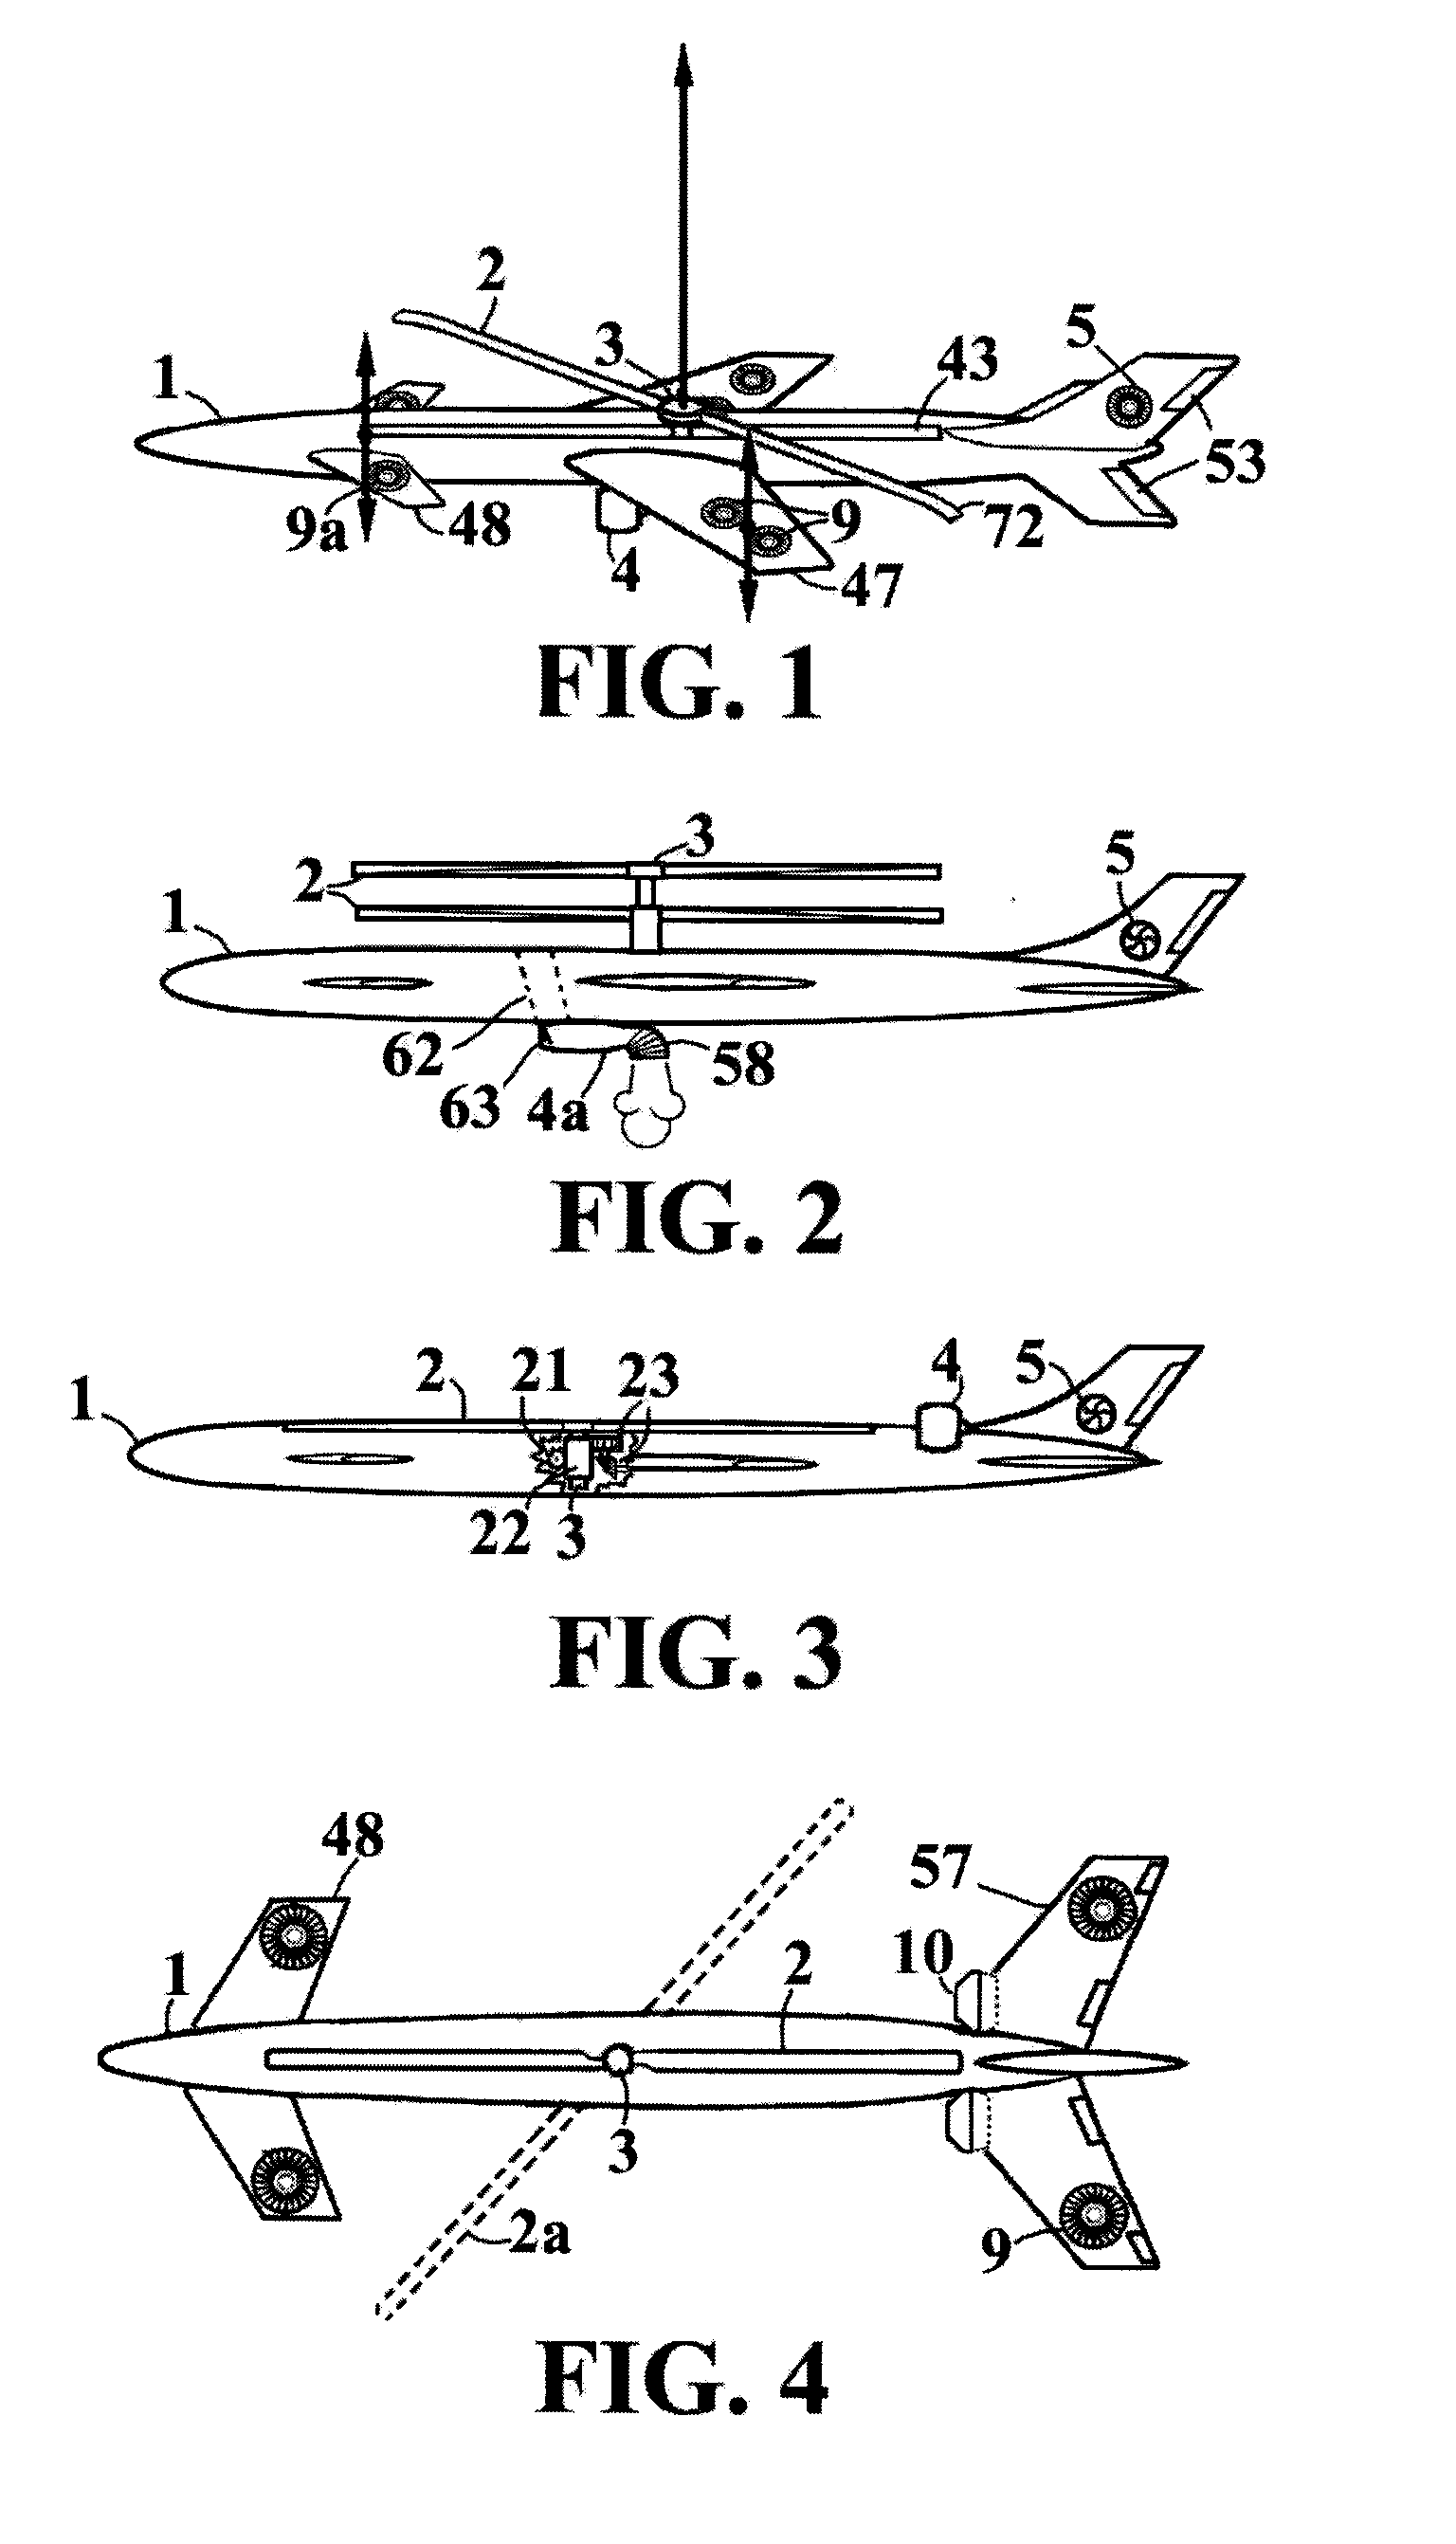 Lift, propulsion and stabilising system for vertical take-off and landing aircraft